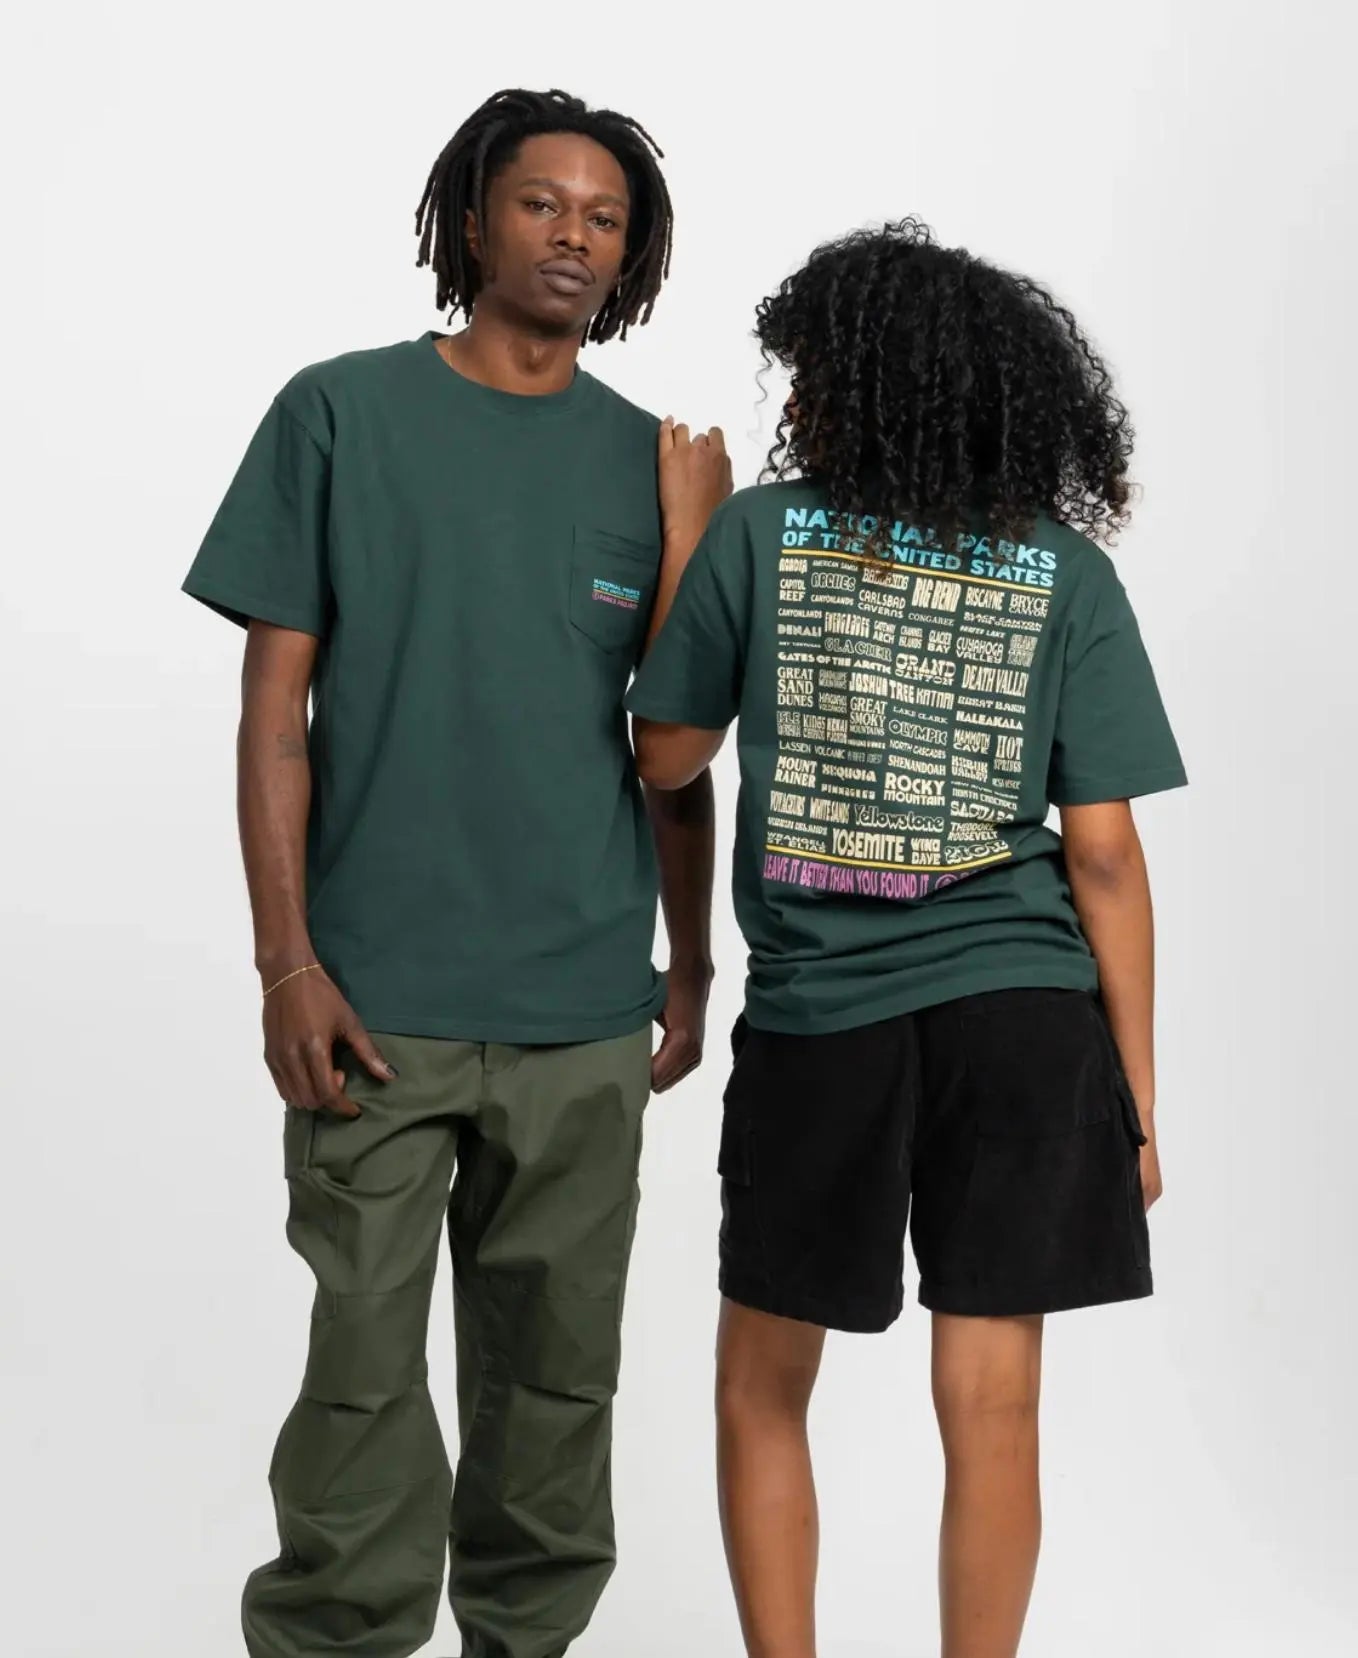 Parks Project National Parks Lineup Pocket Tee Parks Project